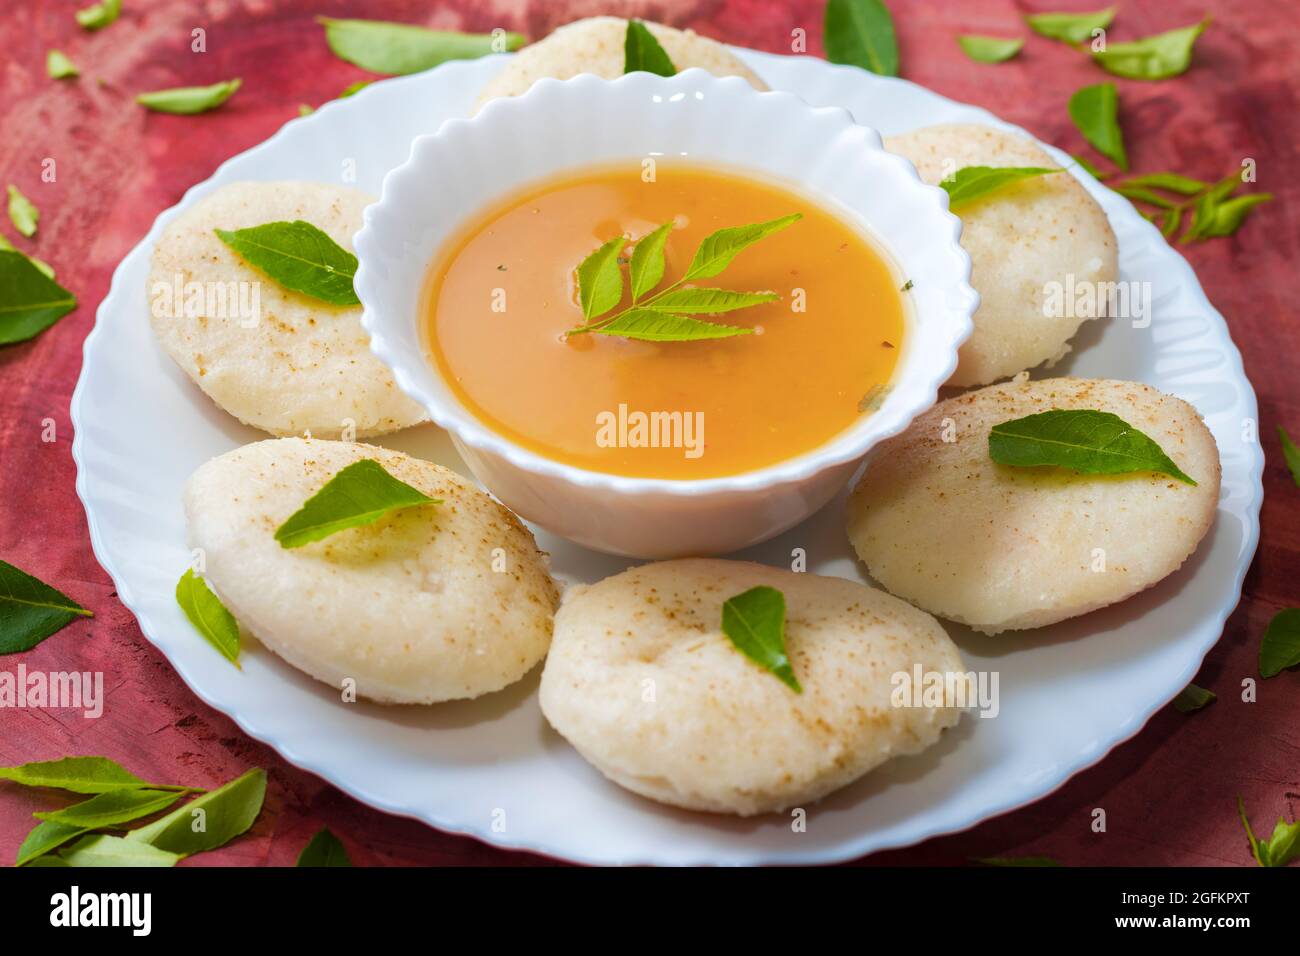 famous South Indian food Idly/idli is ready to serve. Stock Photo